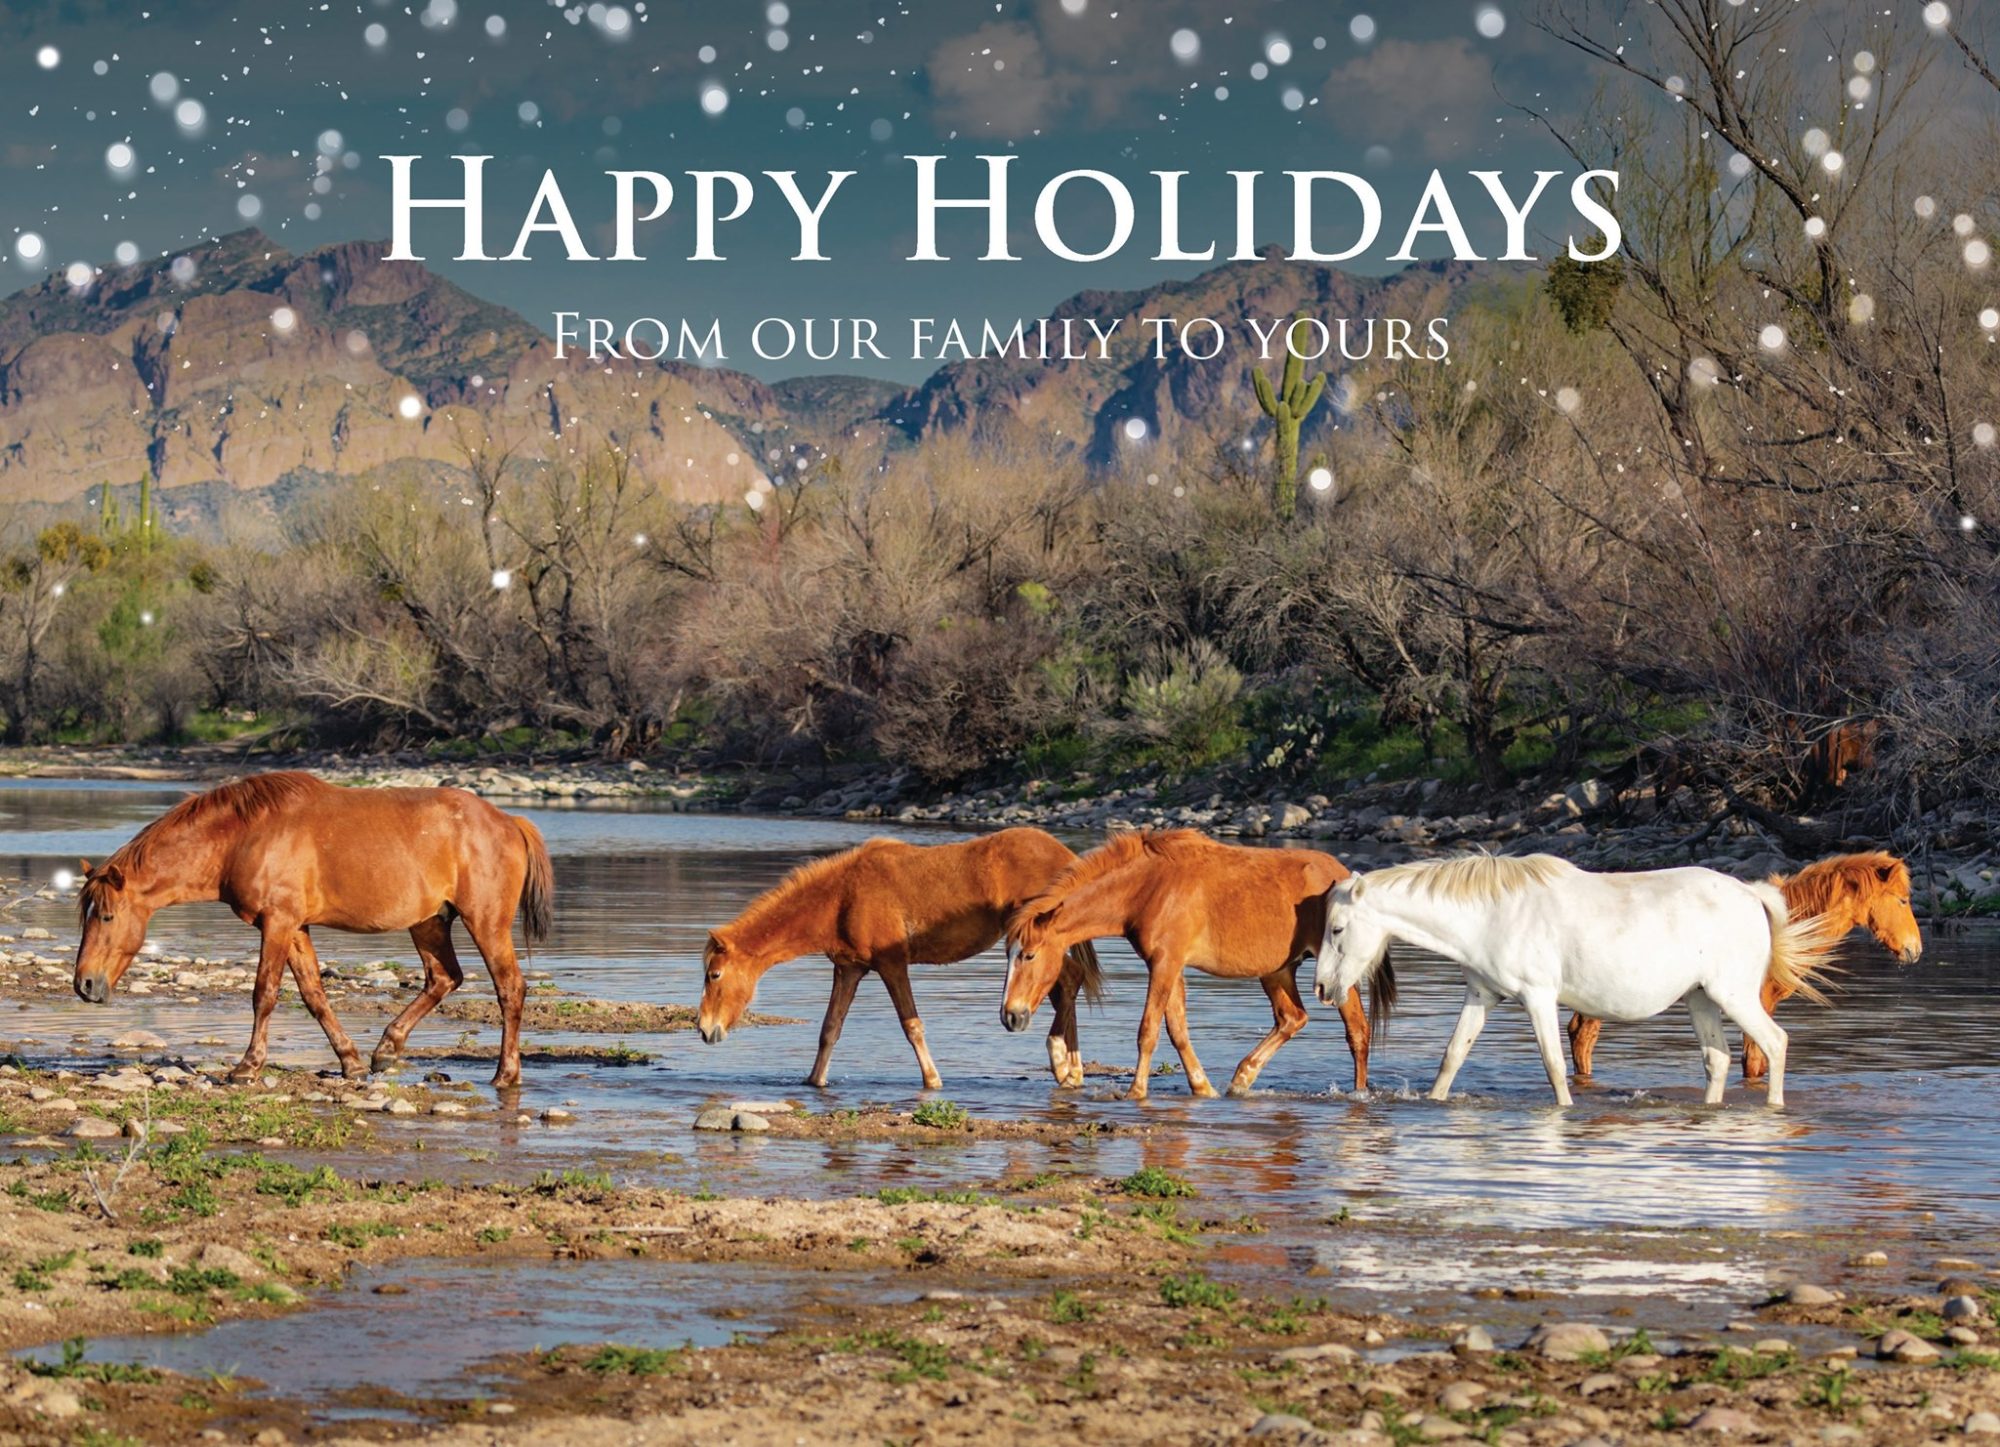 Happy Holidays – From our family to yours!